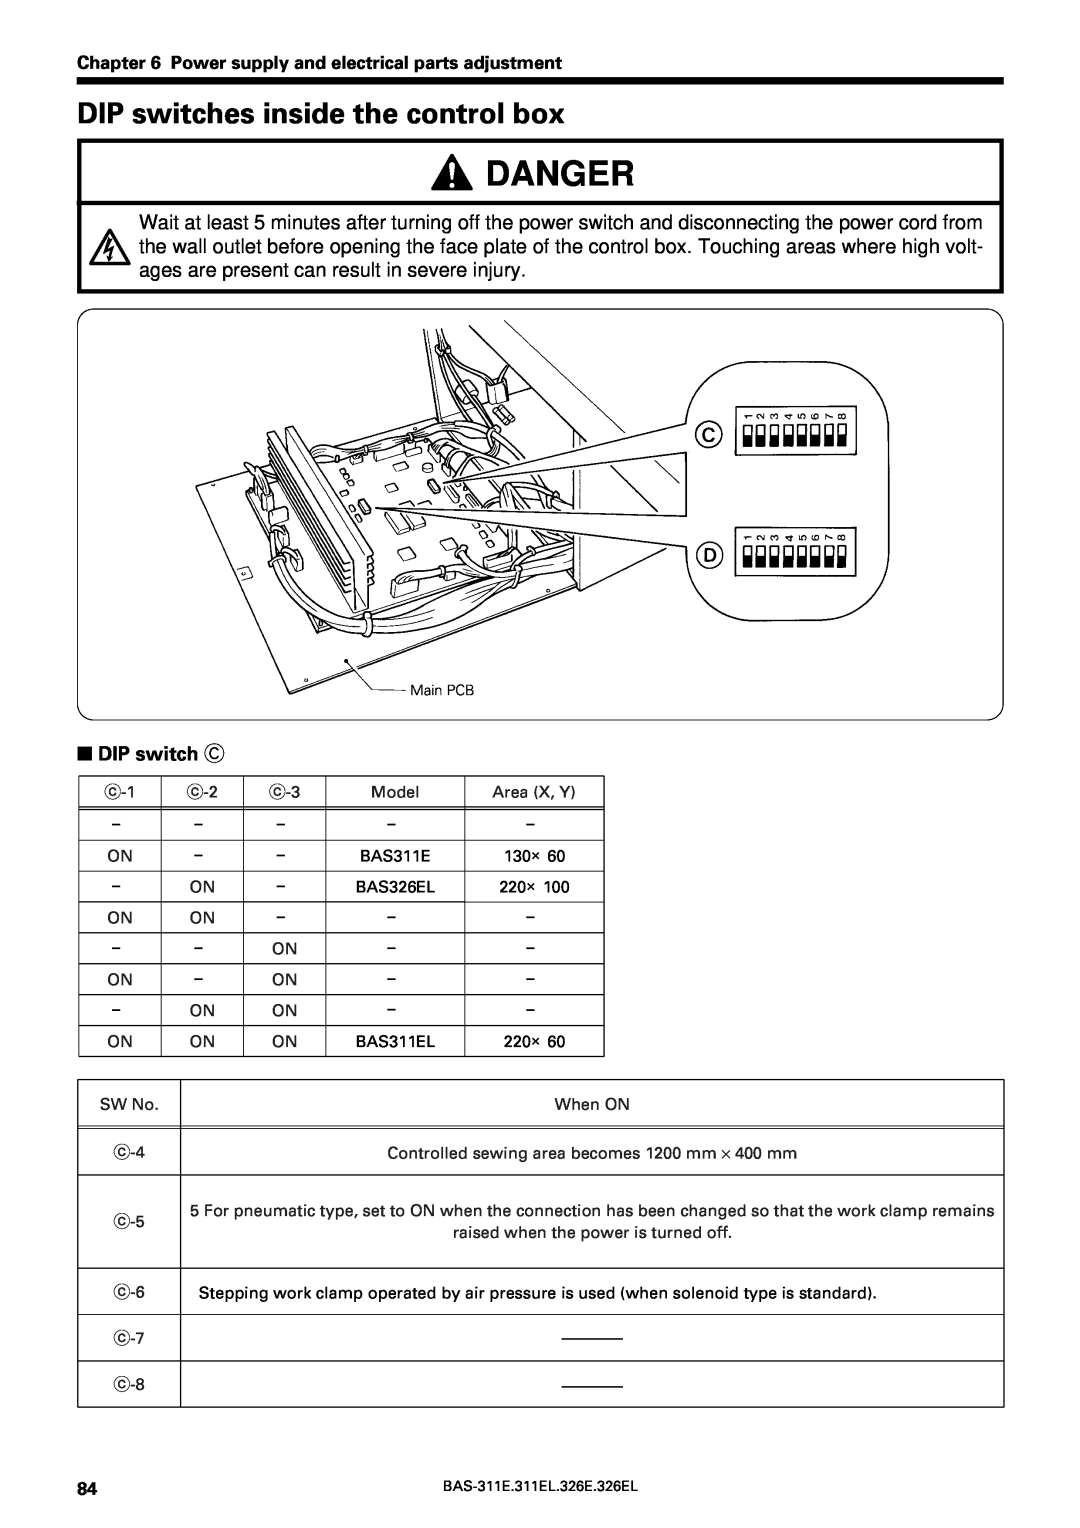 Brother BAS-311E service manual DIP switches inside the control box, Danger, DIP switch C 